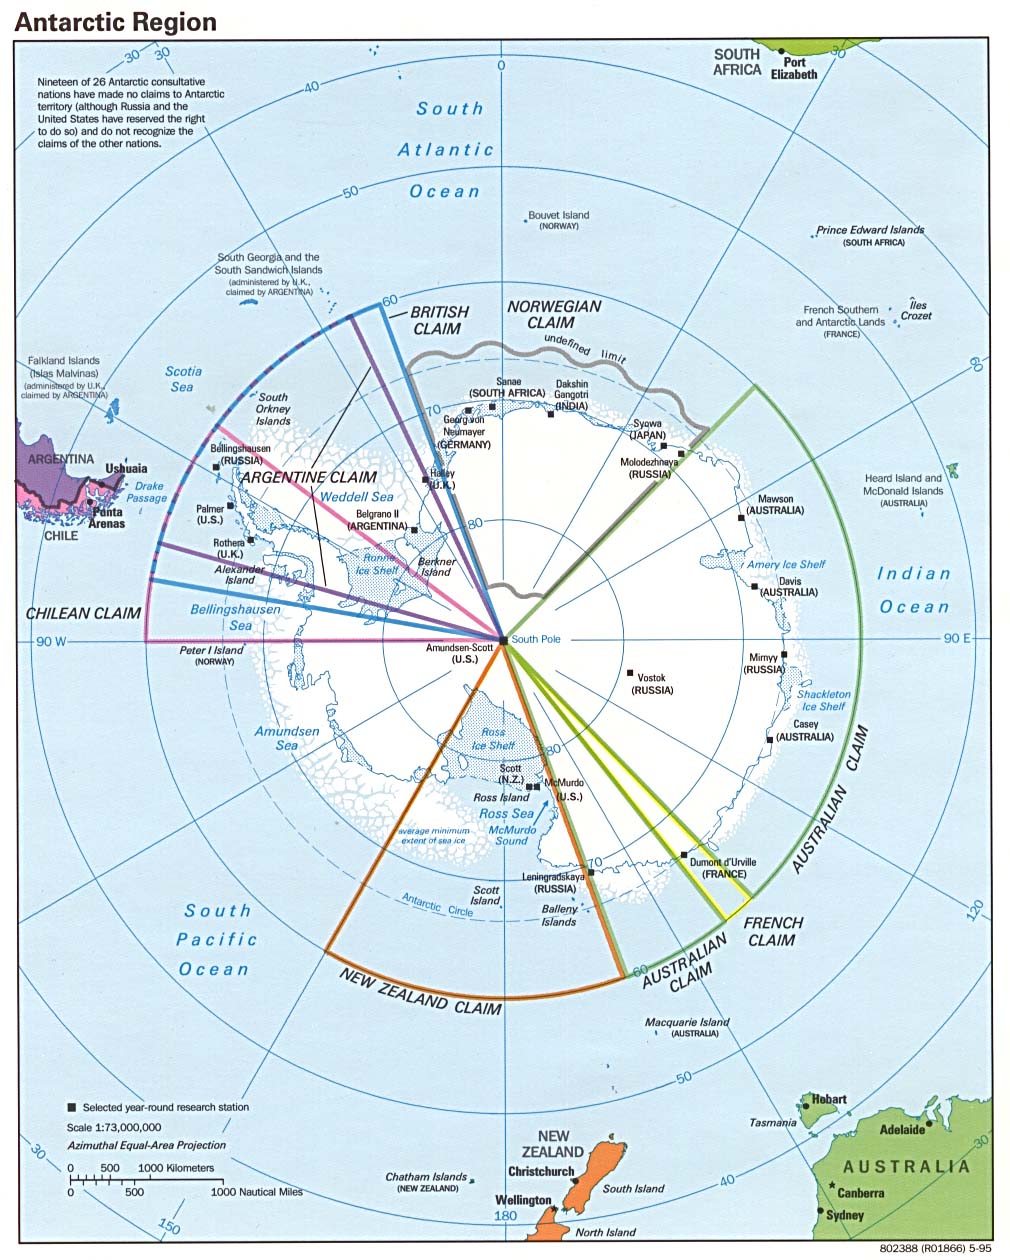 Territorial dash line for each country that claims each portion of Antarctic Circle